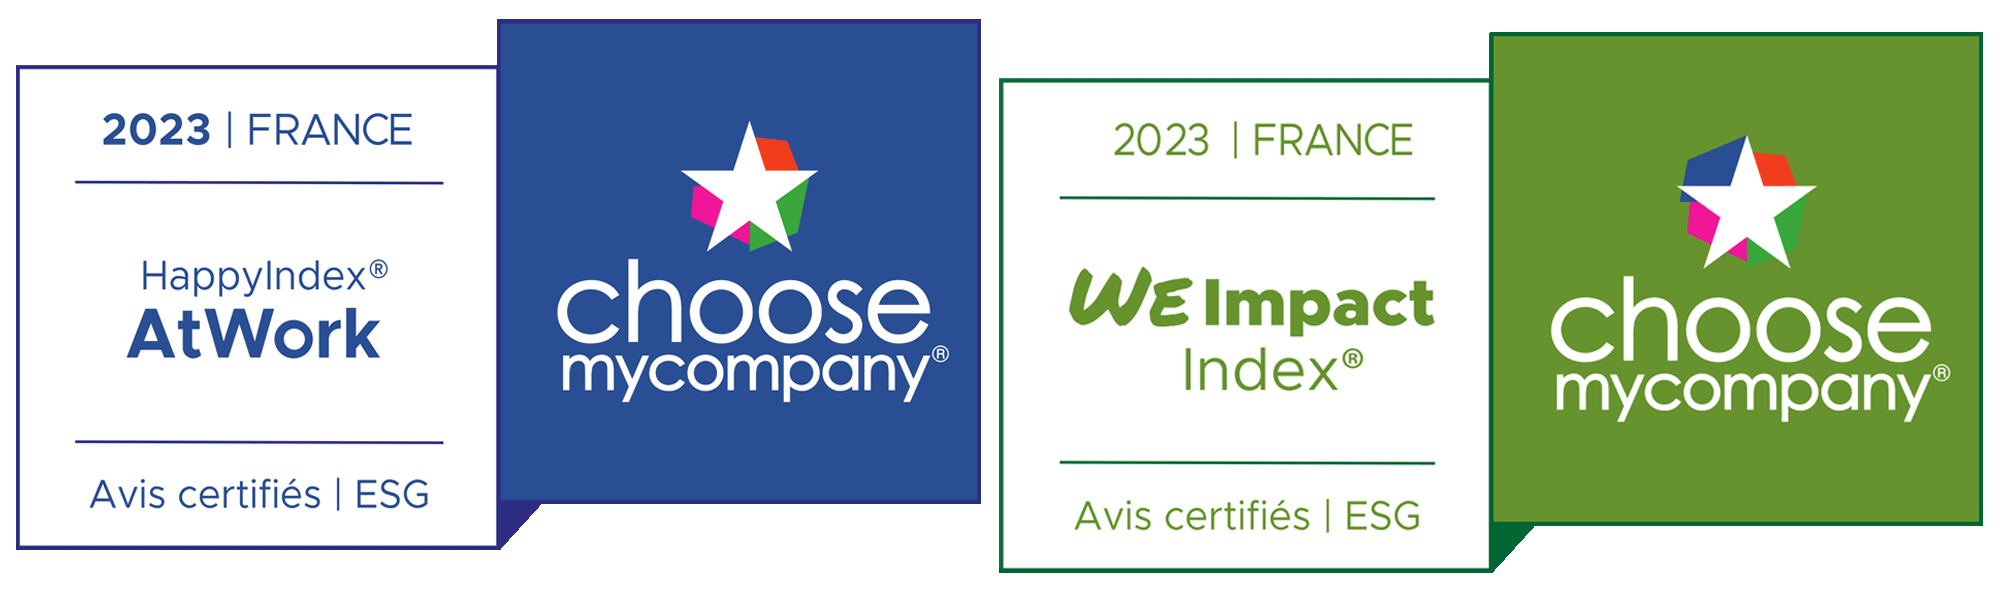 Certification We impact index choose mycompany 3DS groupe